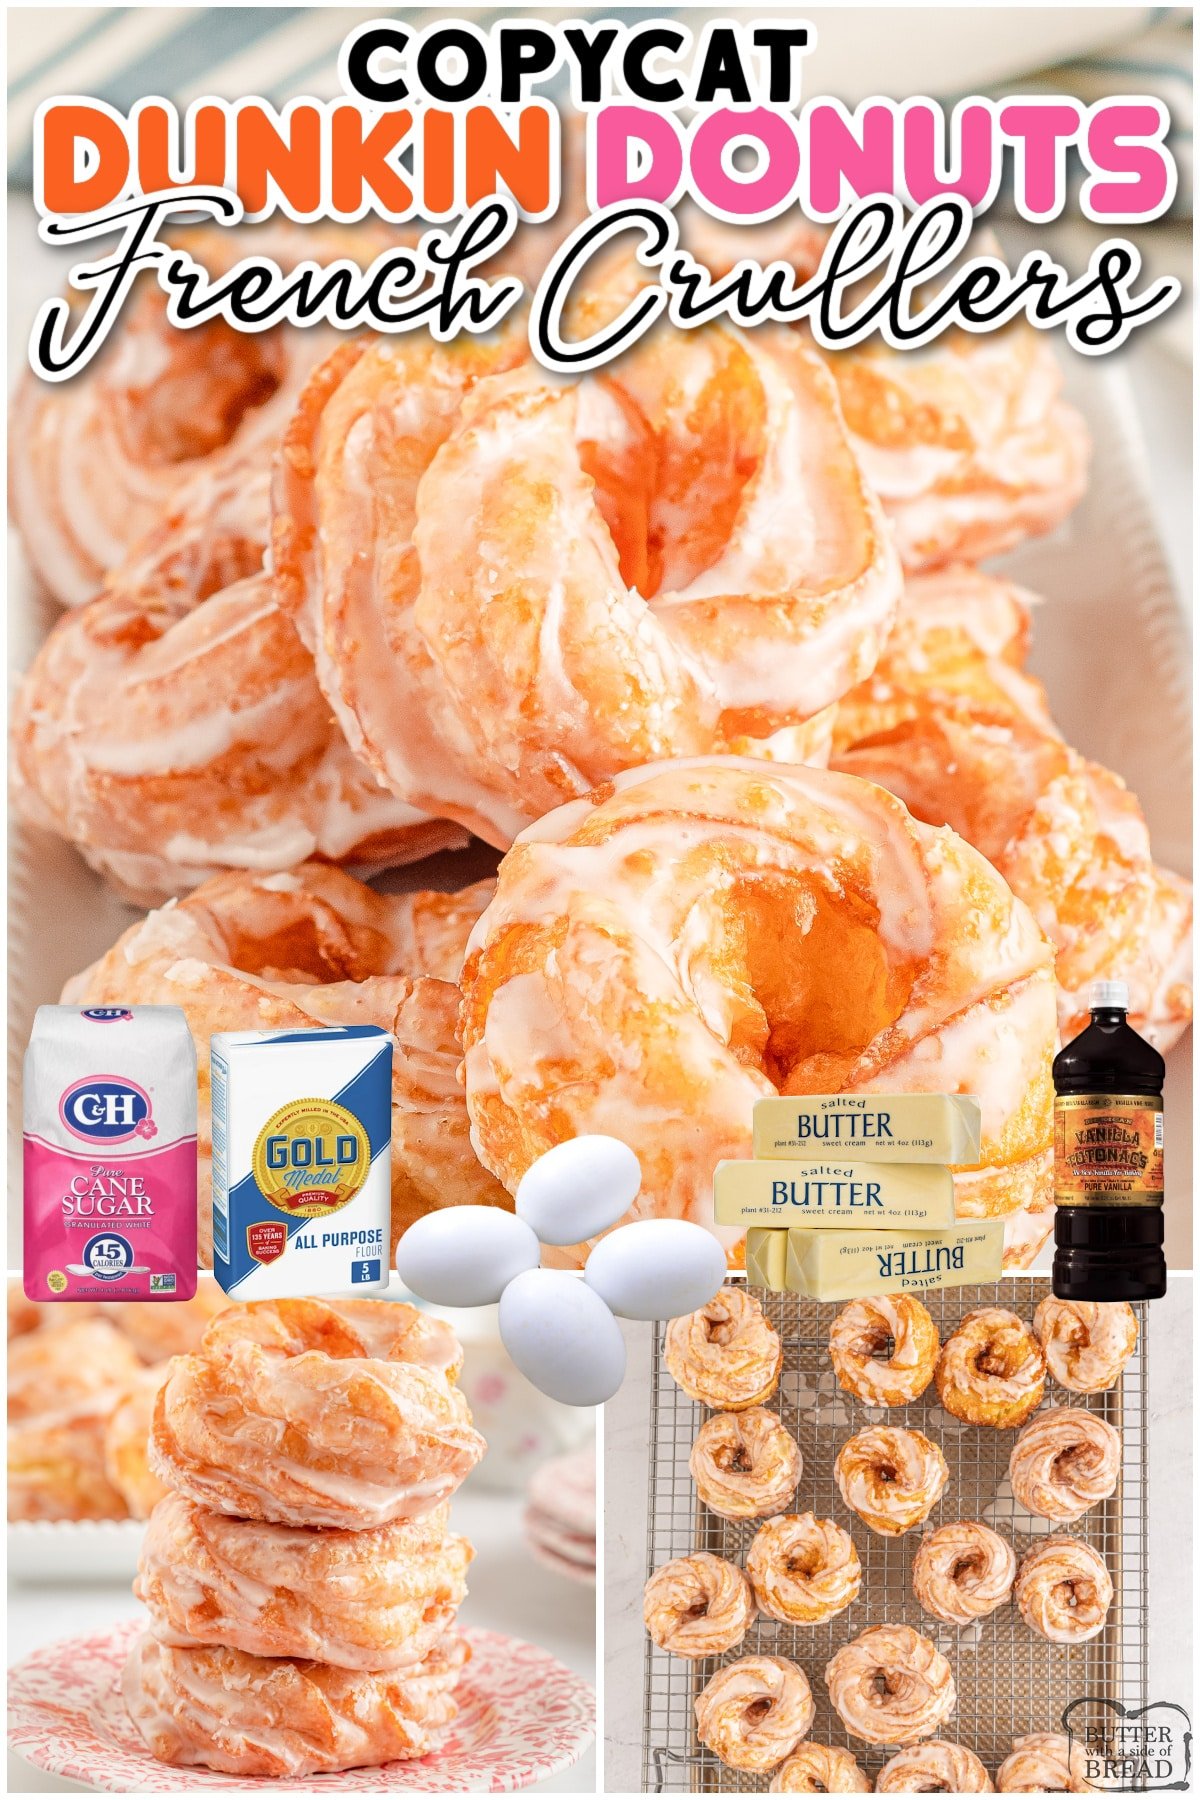 Copycat dunkin donuts crullers recipe made from scratch! Light & crisp on the outside, soft & sweet on the inside, then brushed with an easy vanilla glaze for the best copycat donuts ever!